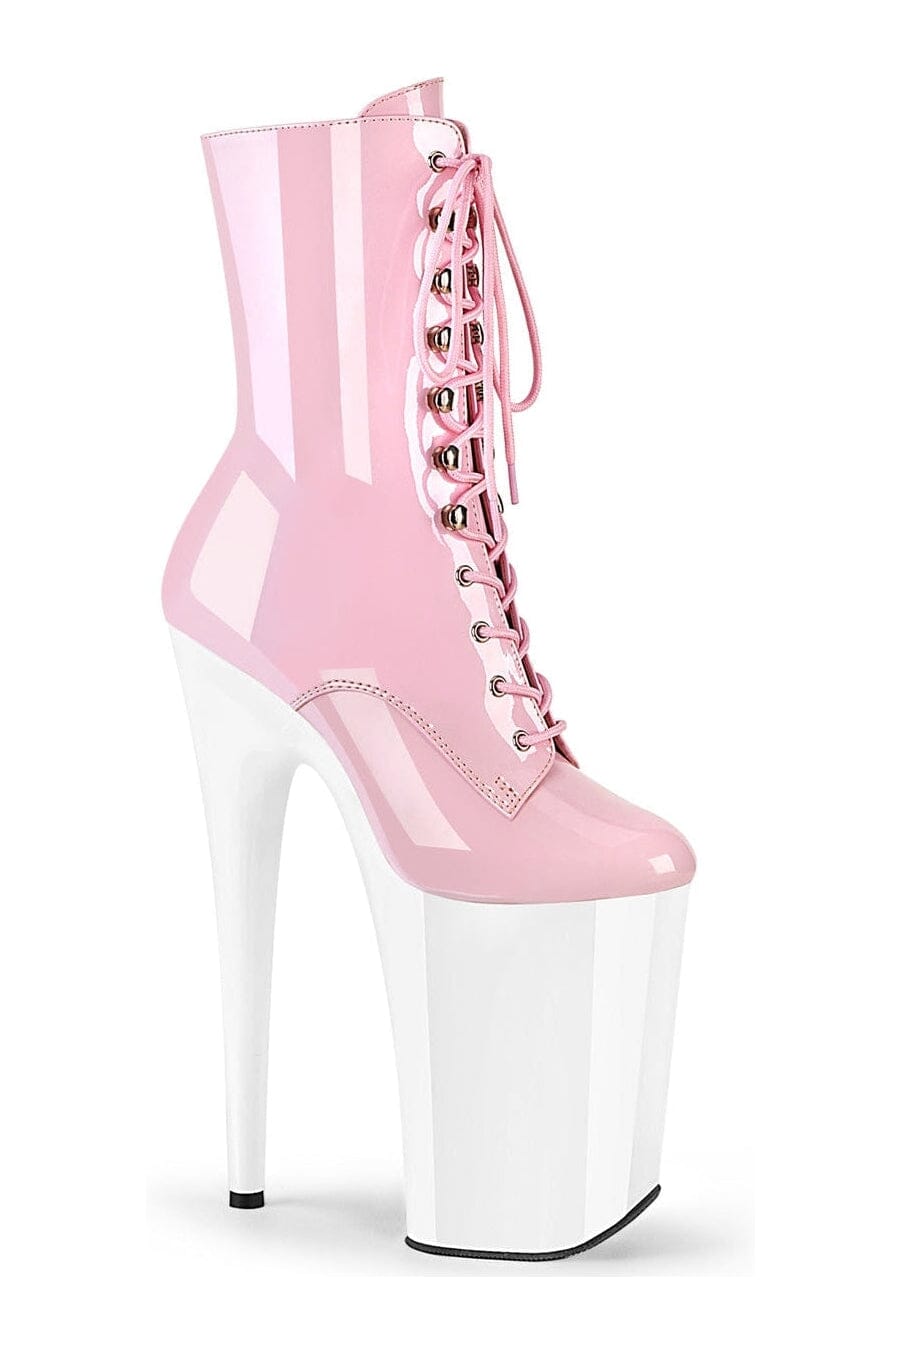 INFINITY-1020 Pink Patent Ankle Boot-Ankle Boots-Pleaser-Pink-5-Patent-SEXYSHOES.COM